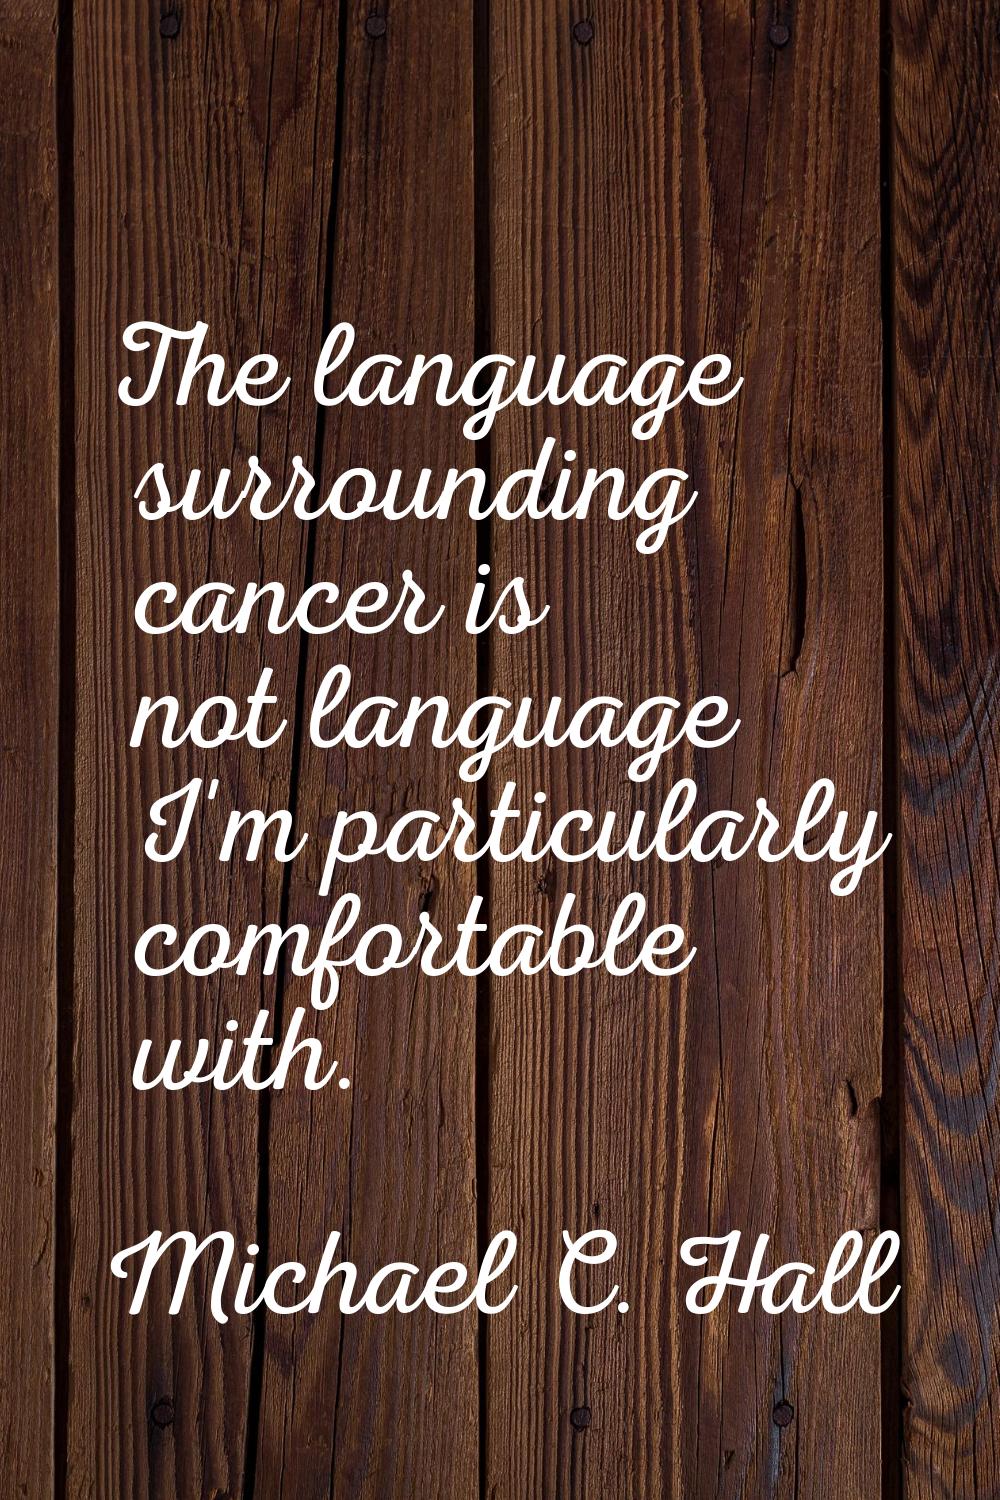 The language surrounding cancer is not language I'm particularly comfortable with.